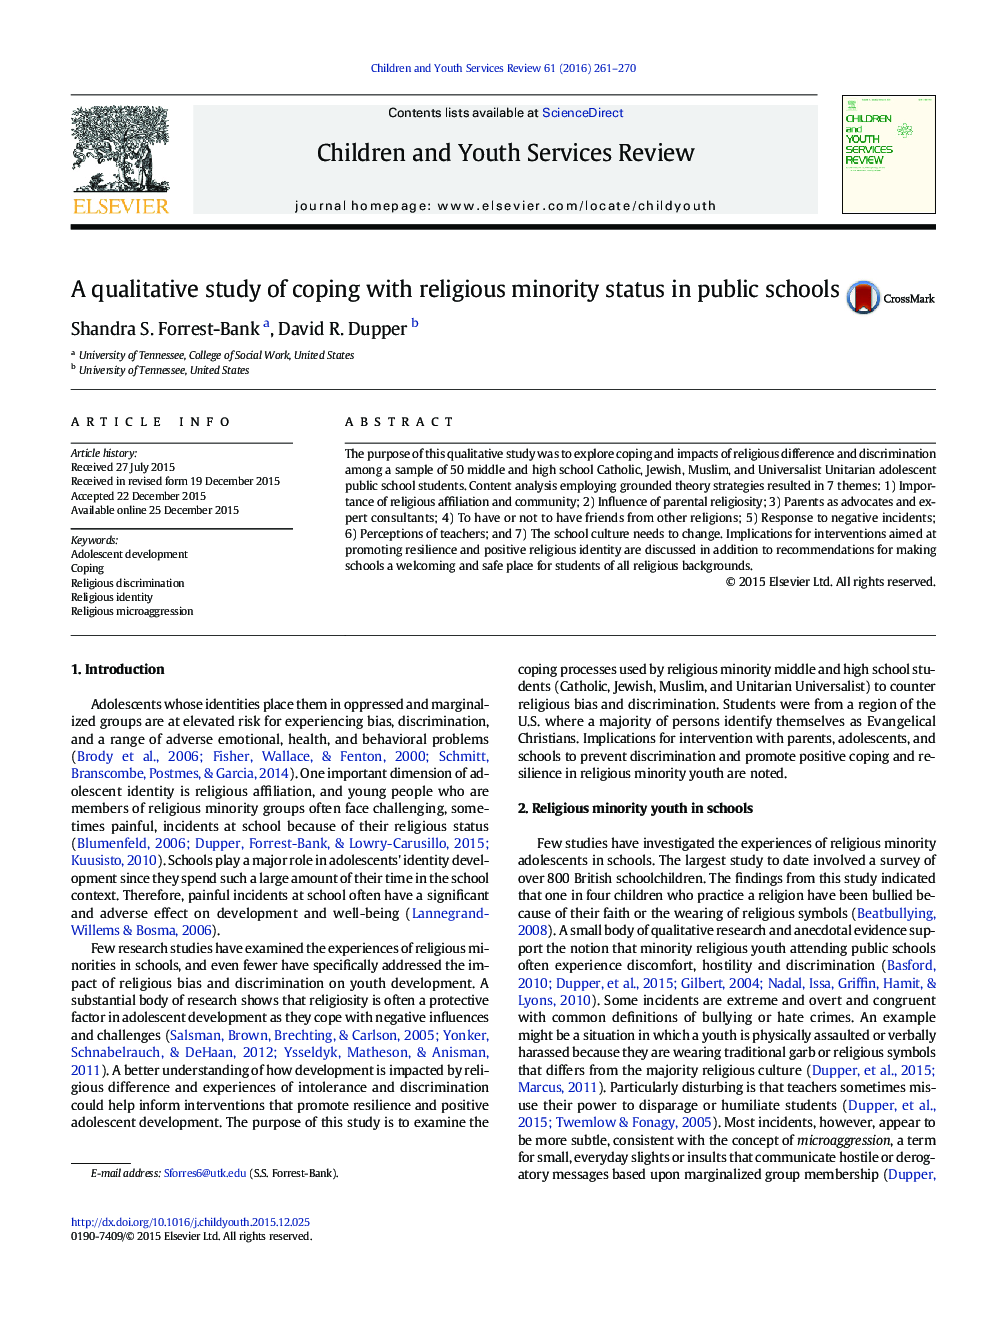 A qualitative study of coping with religious minority status in public schools